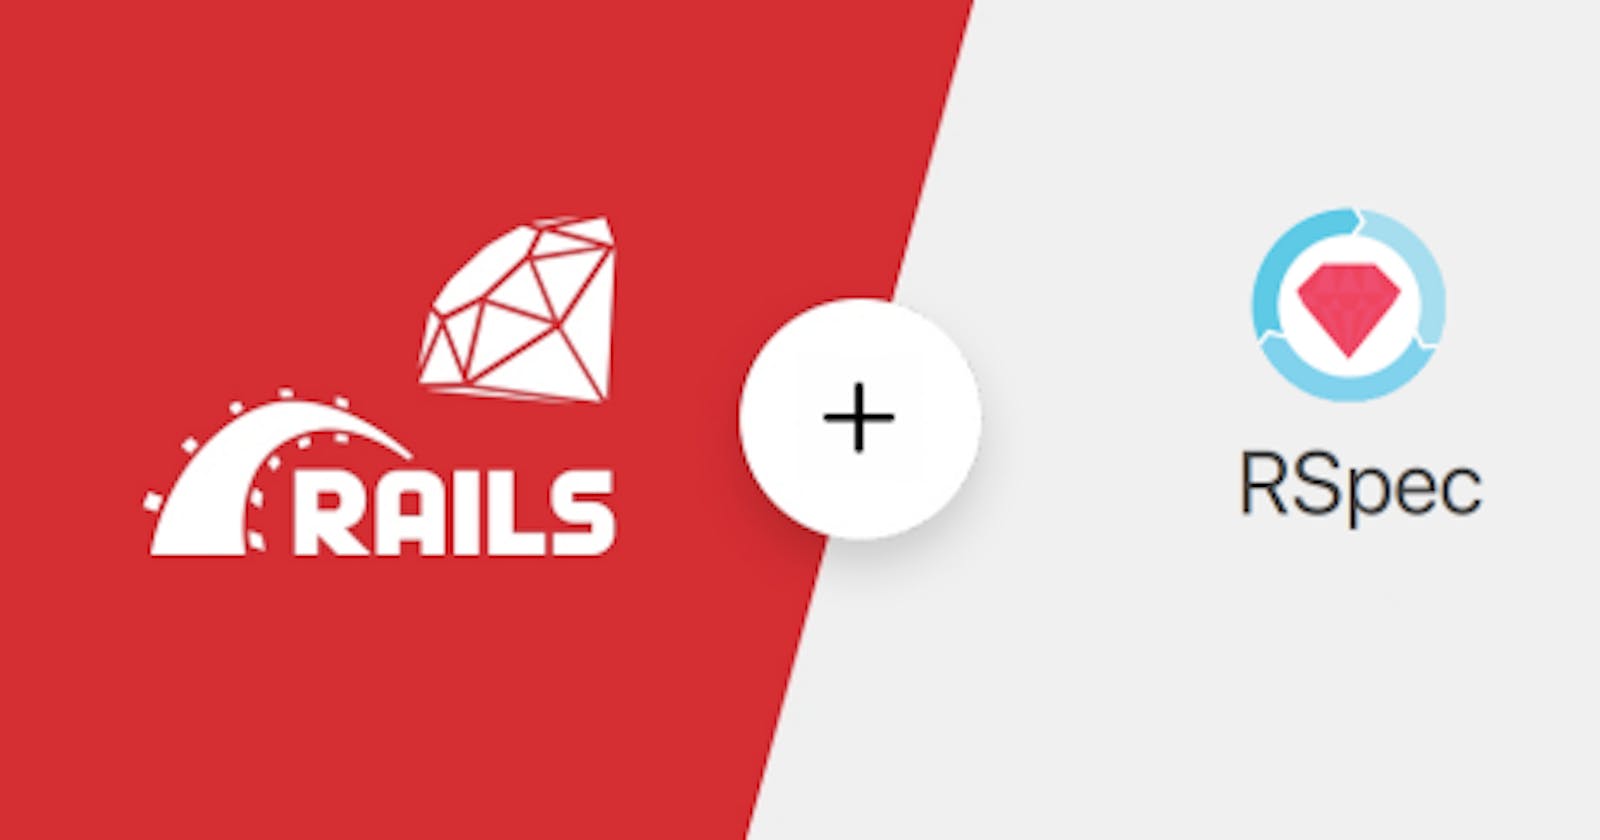 Testing Ruby on Rails Applications Using Rspec